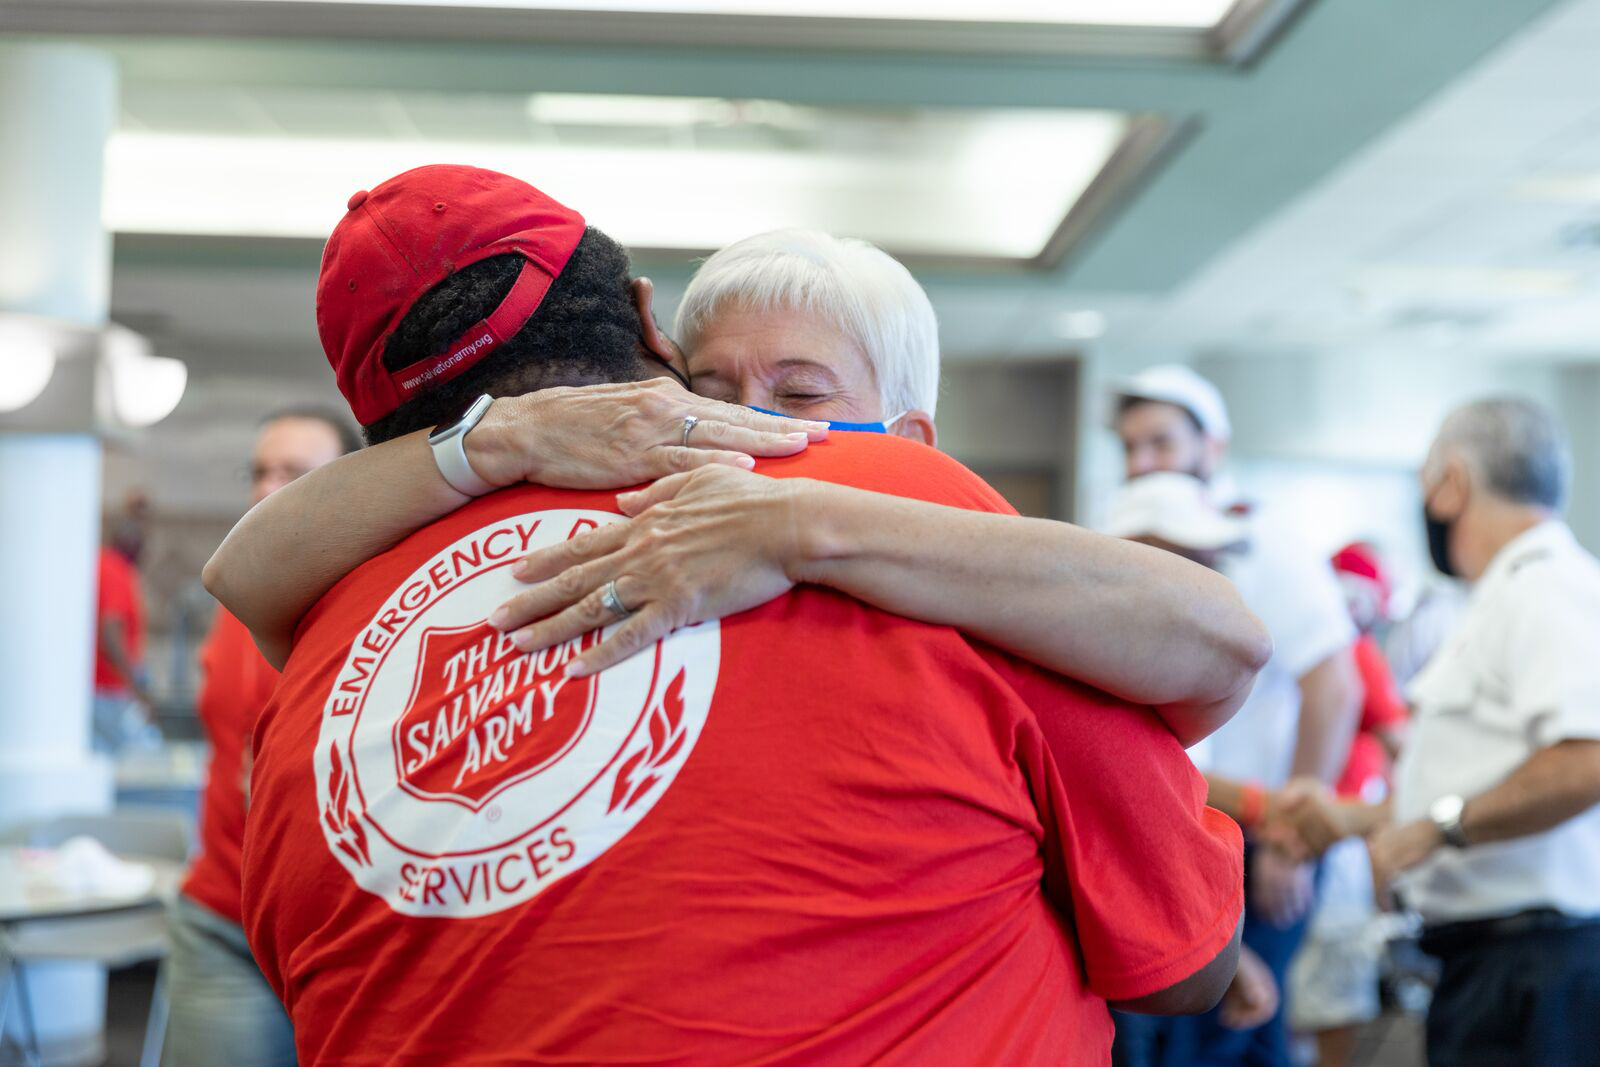 Salvation Army Emergency Disaster Services volunteer offering emotional and spiritual care to disaster survivor